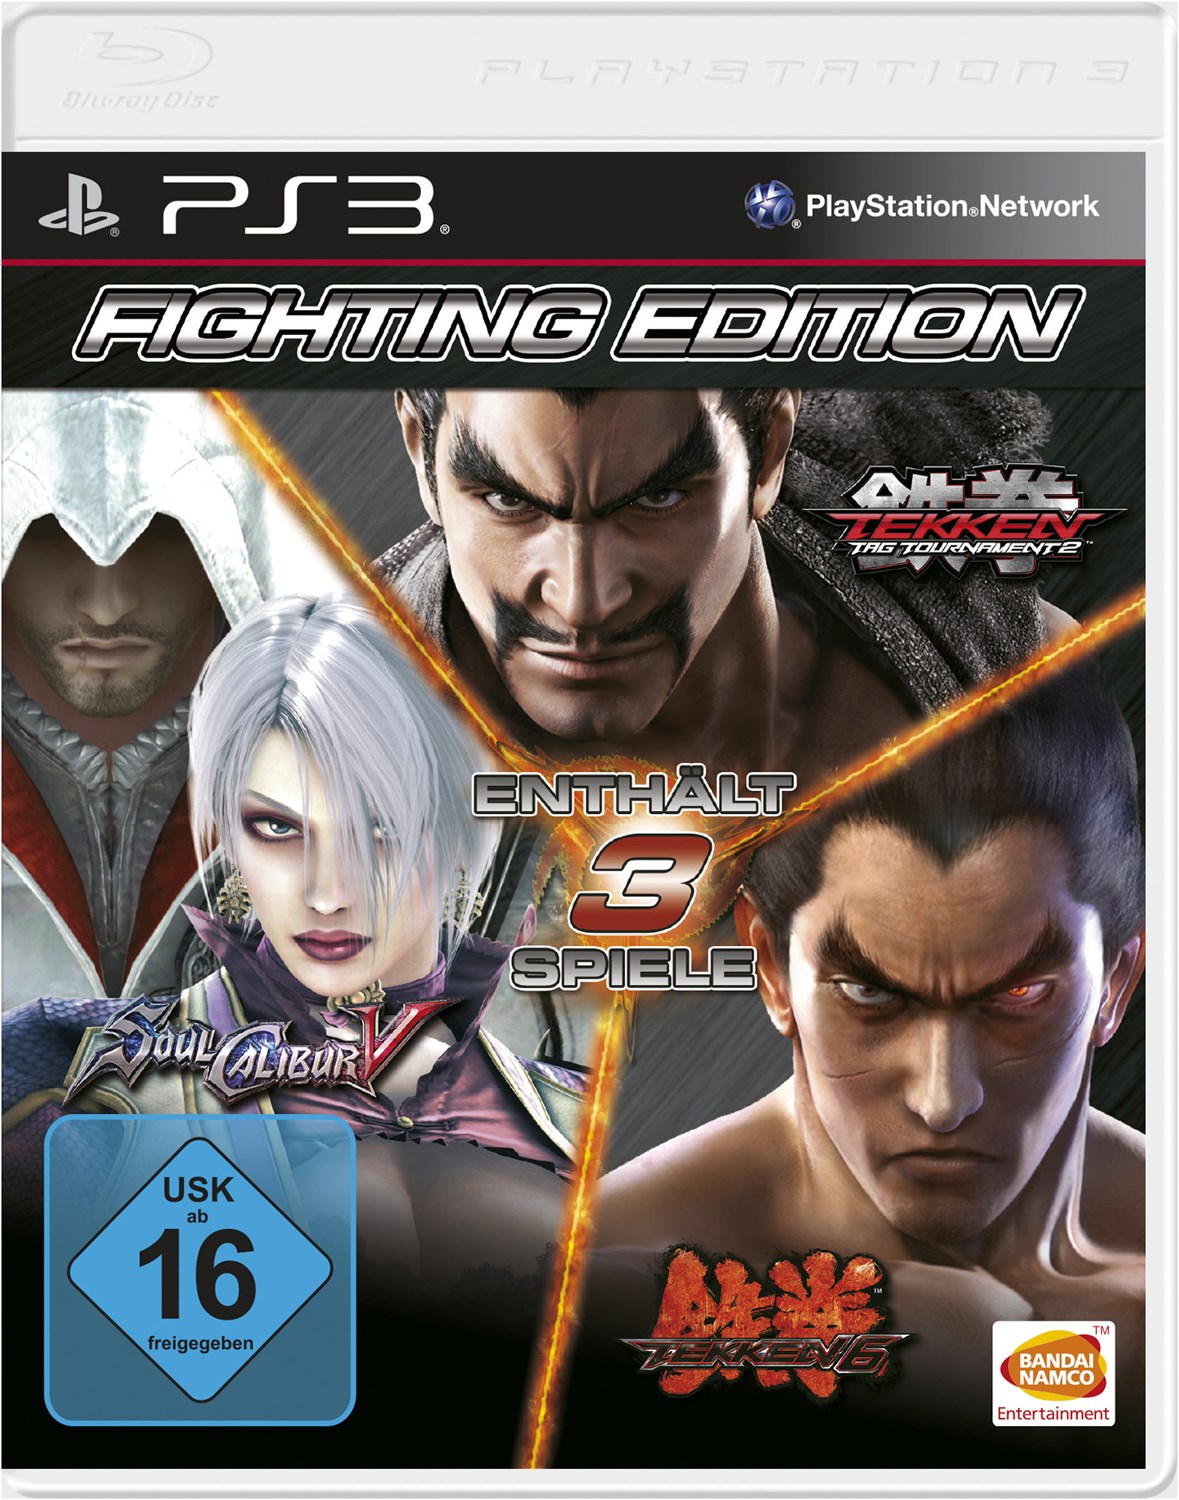 Software Pyramide PS3 Fighting Edition